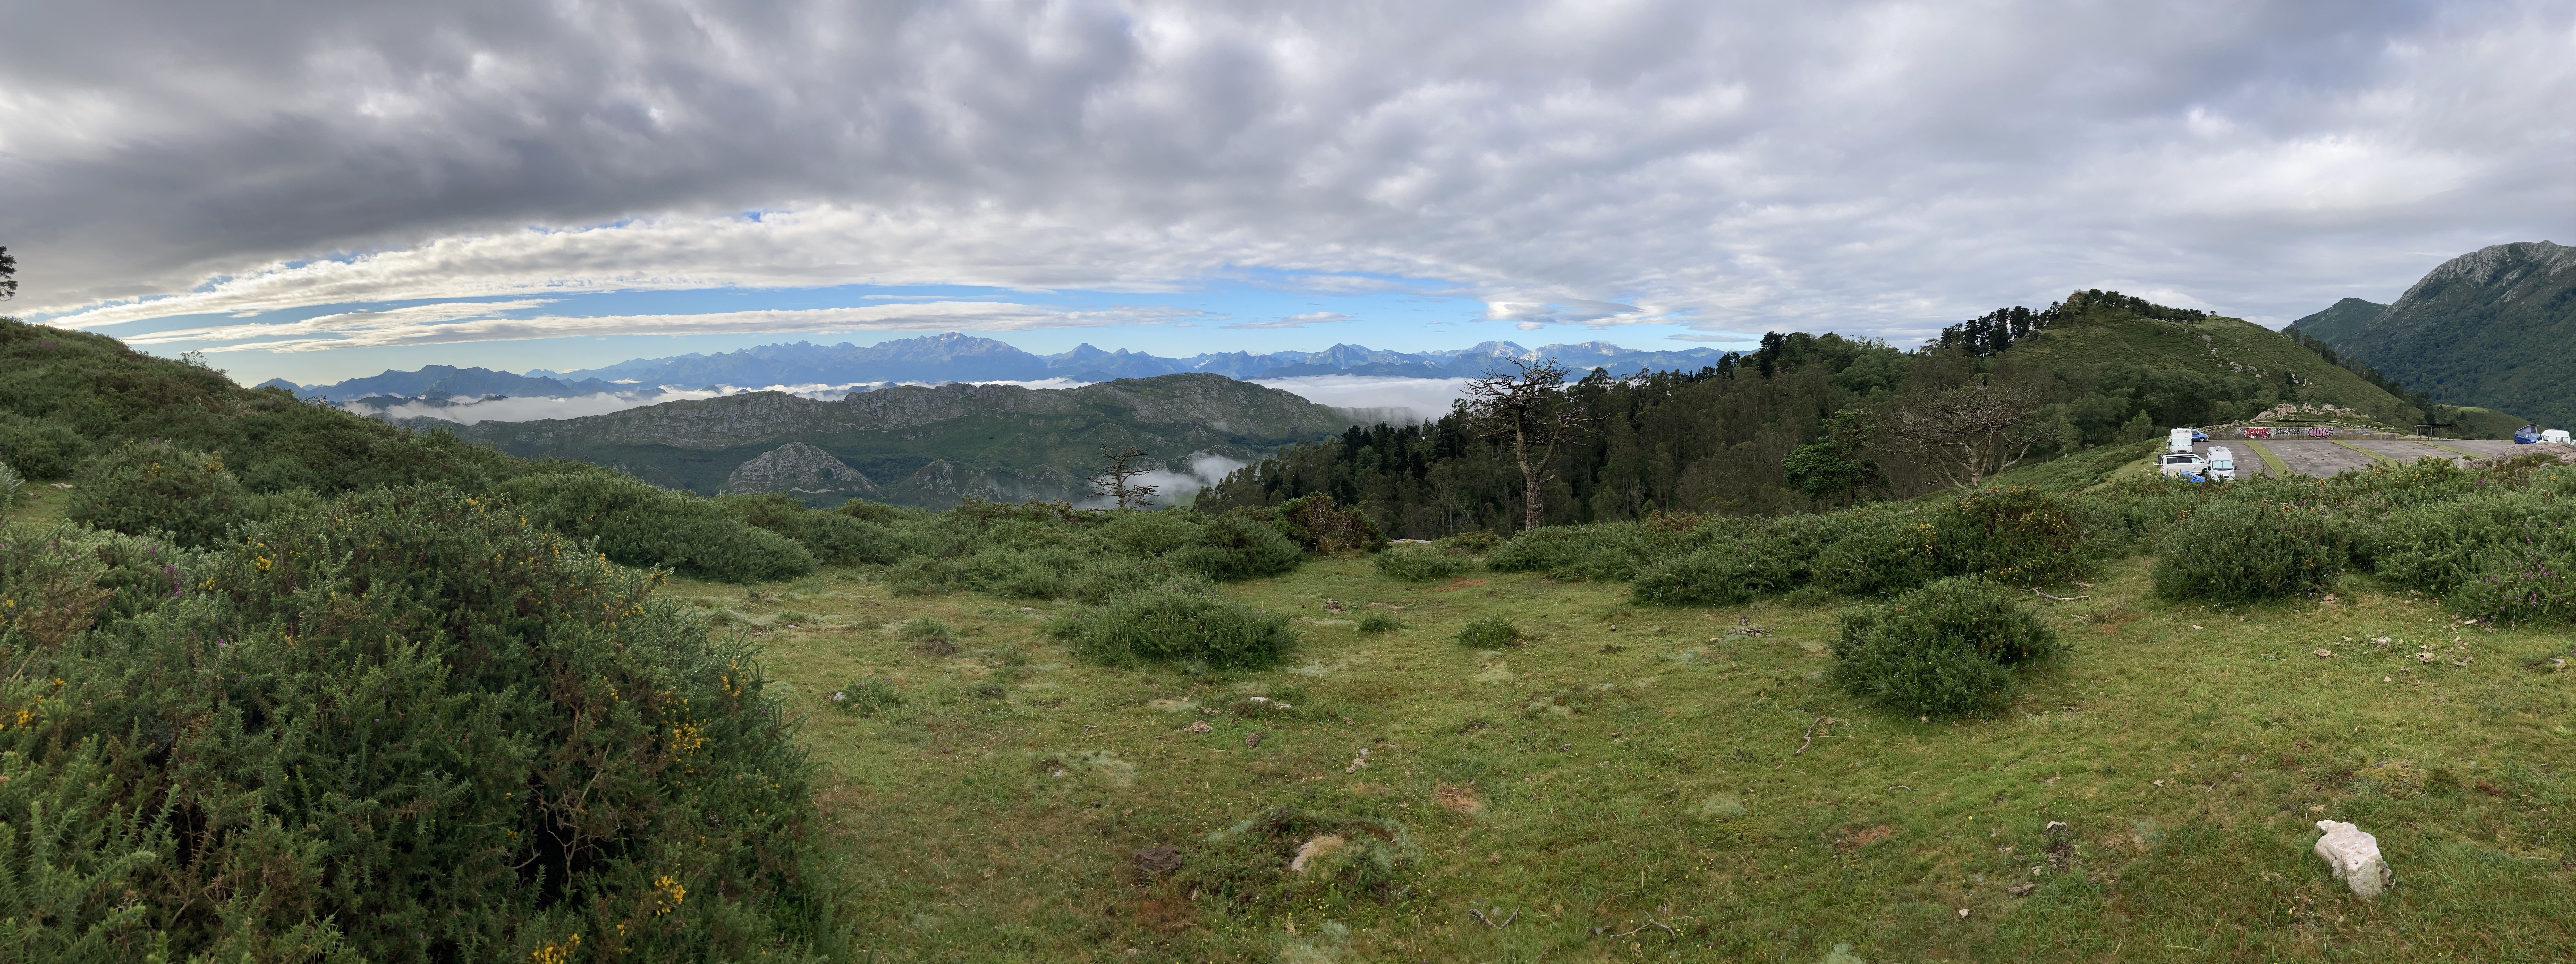 A panorama view on top of the mountains in Austurias